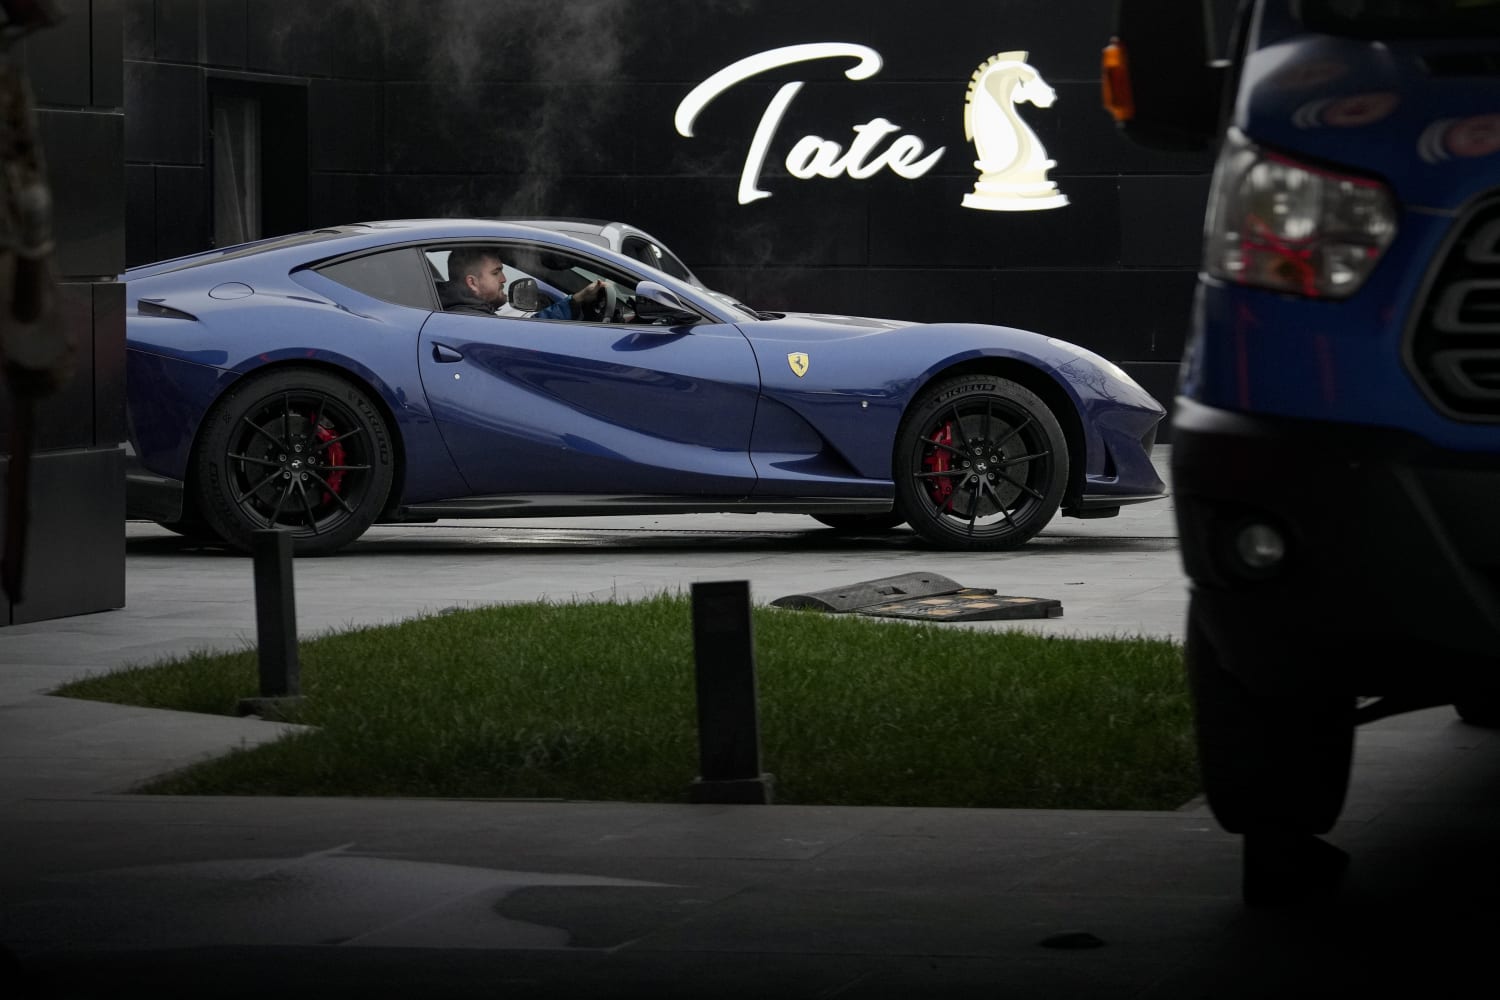 Romanian police seize Andrew Tate's luxury cars and assets